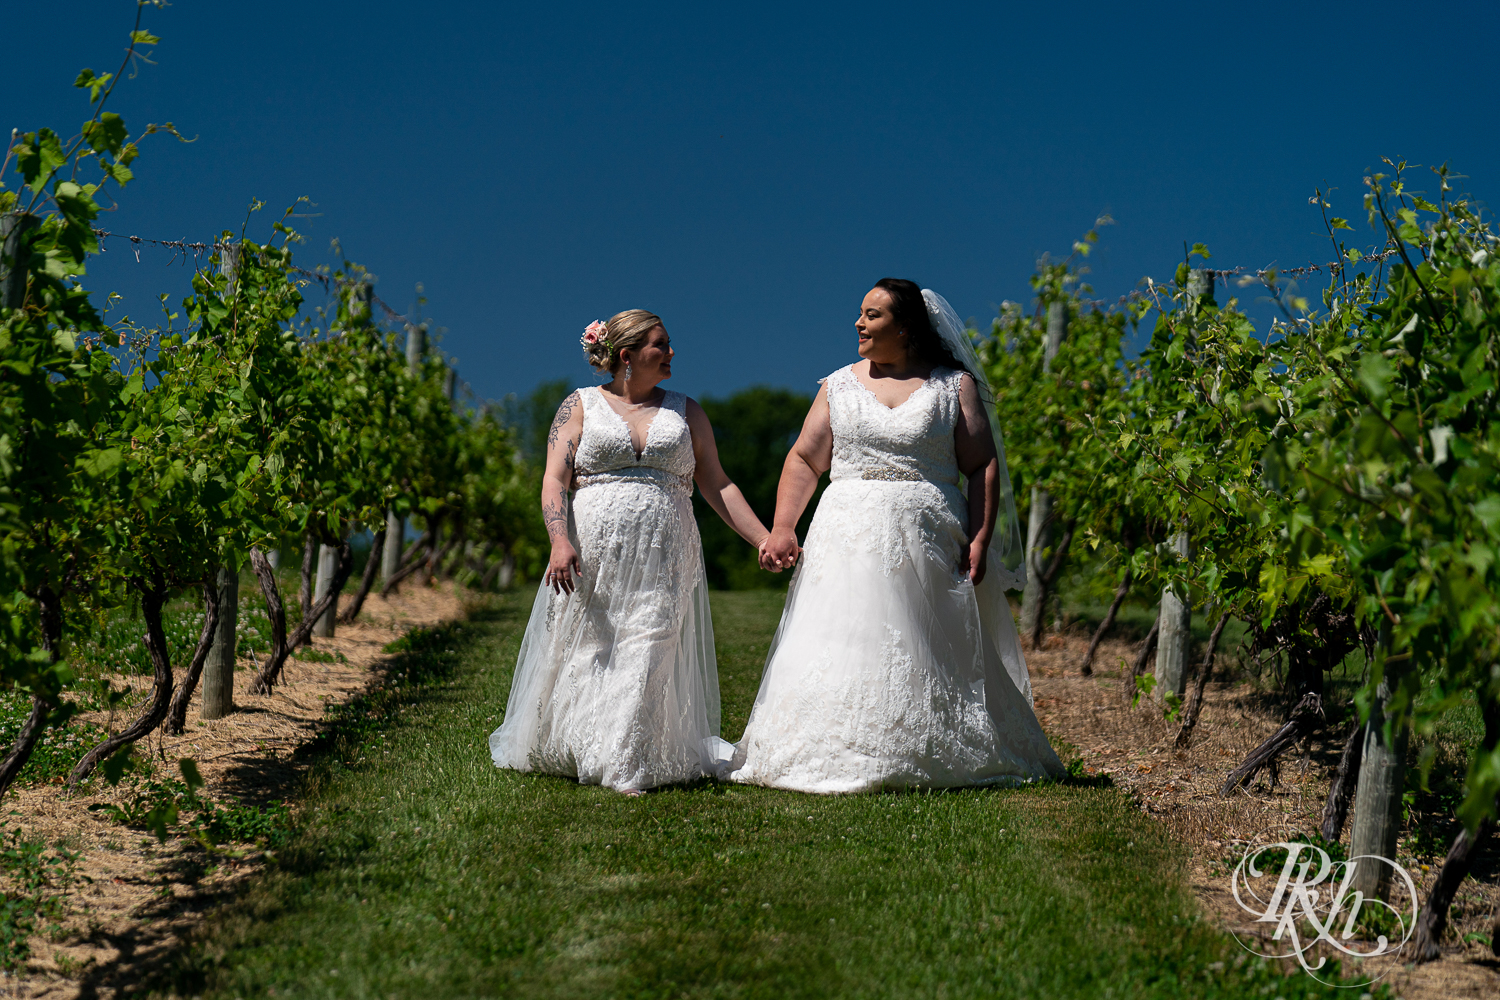 Lesbian brides kiss in vineyard during wedding day at Cannon River Winery in Cannon Falls, Minnesota.